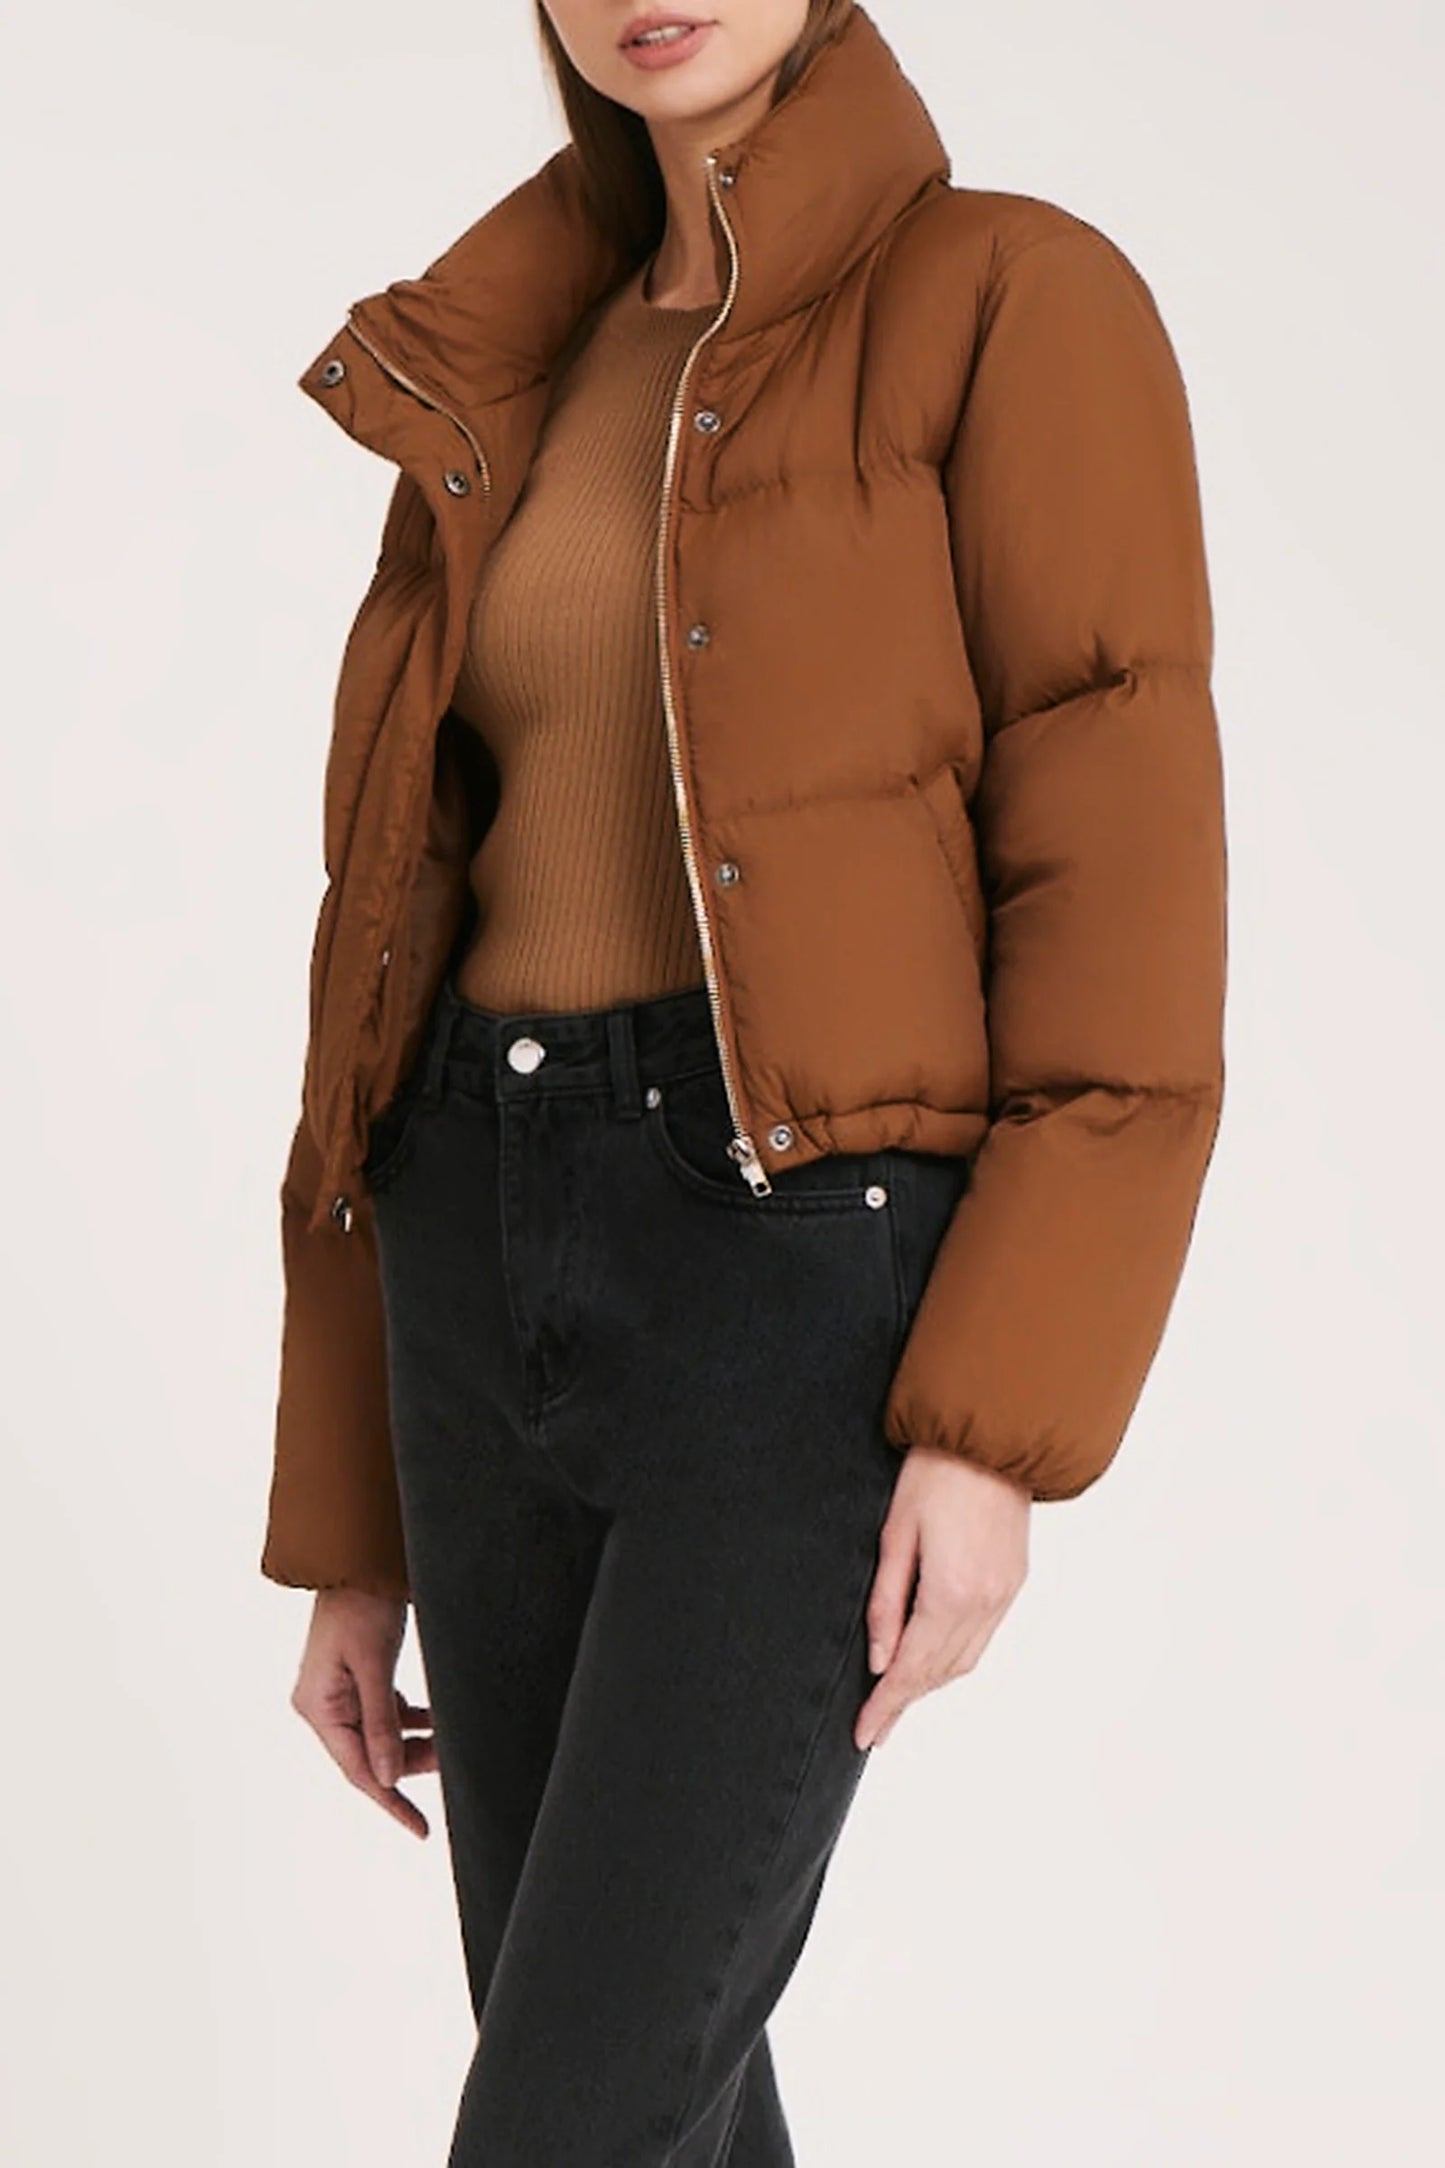 TOPHER PUFFER JACKET | TOFFEE